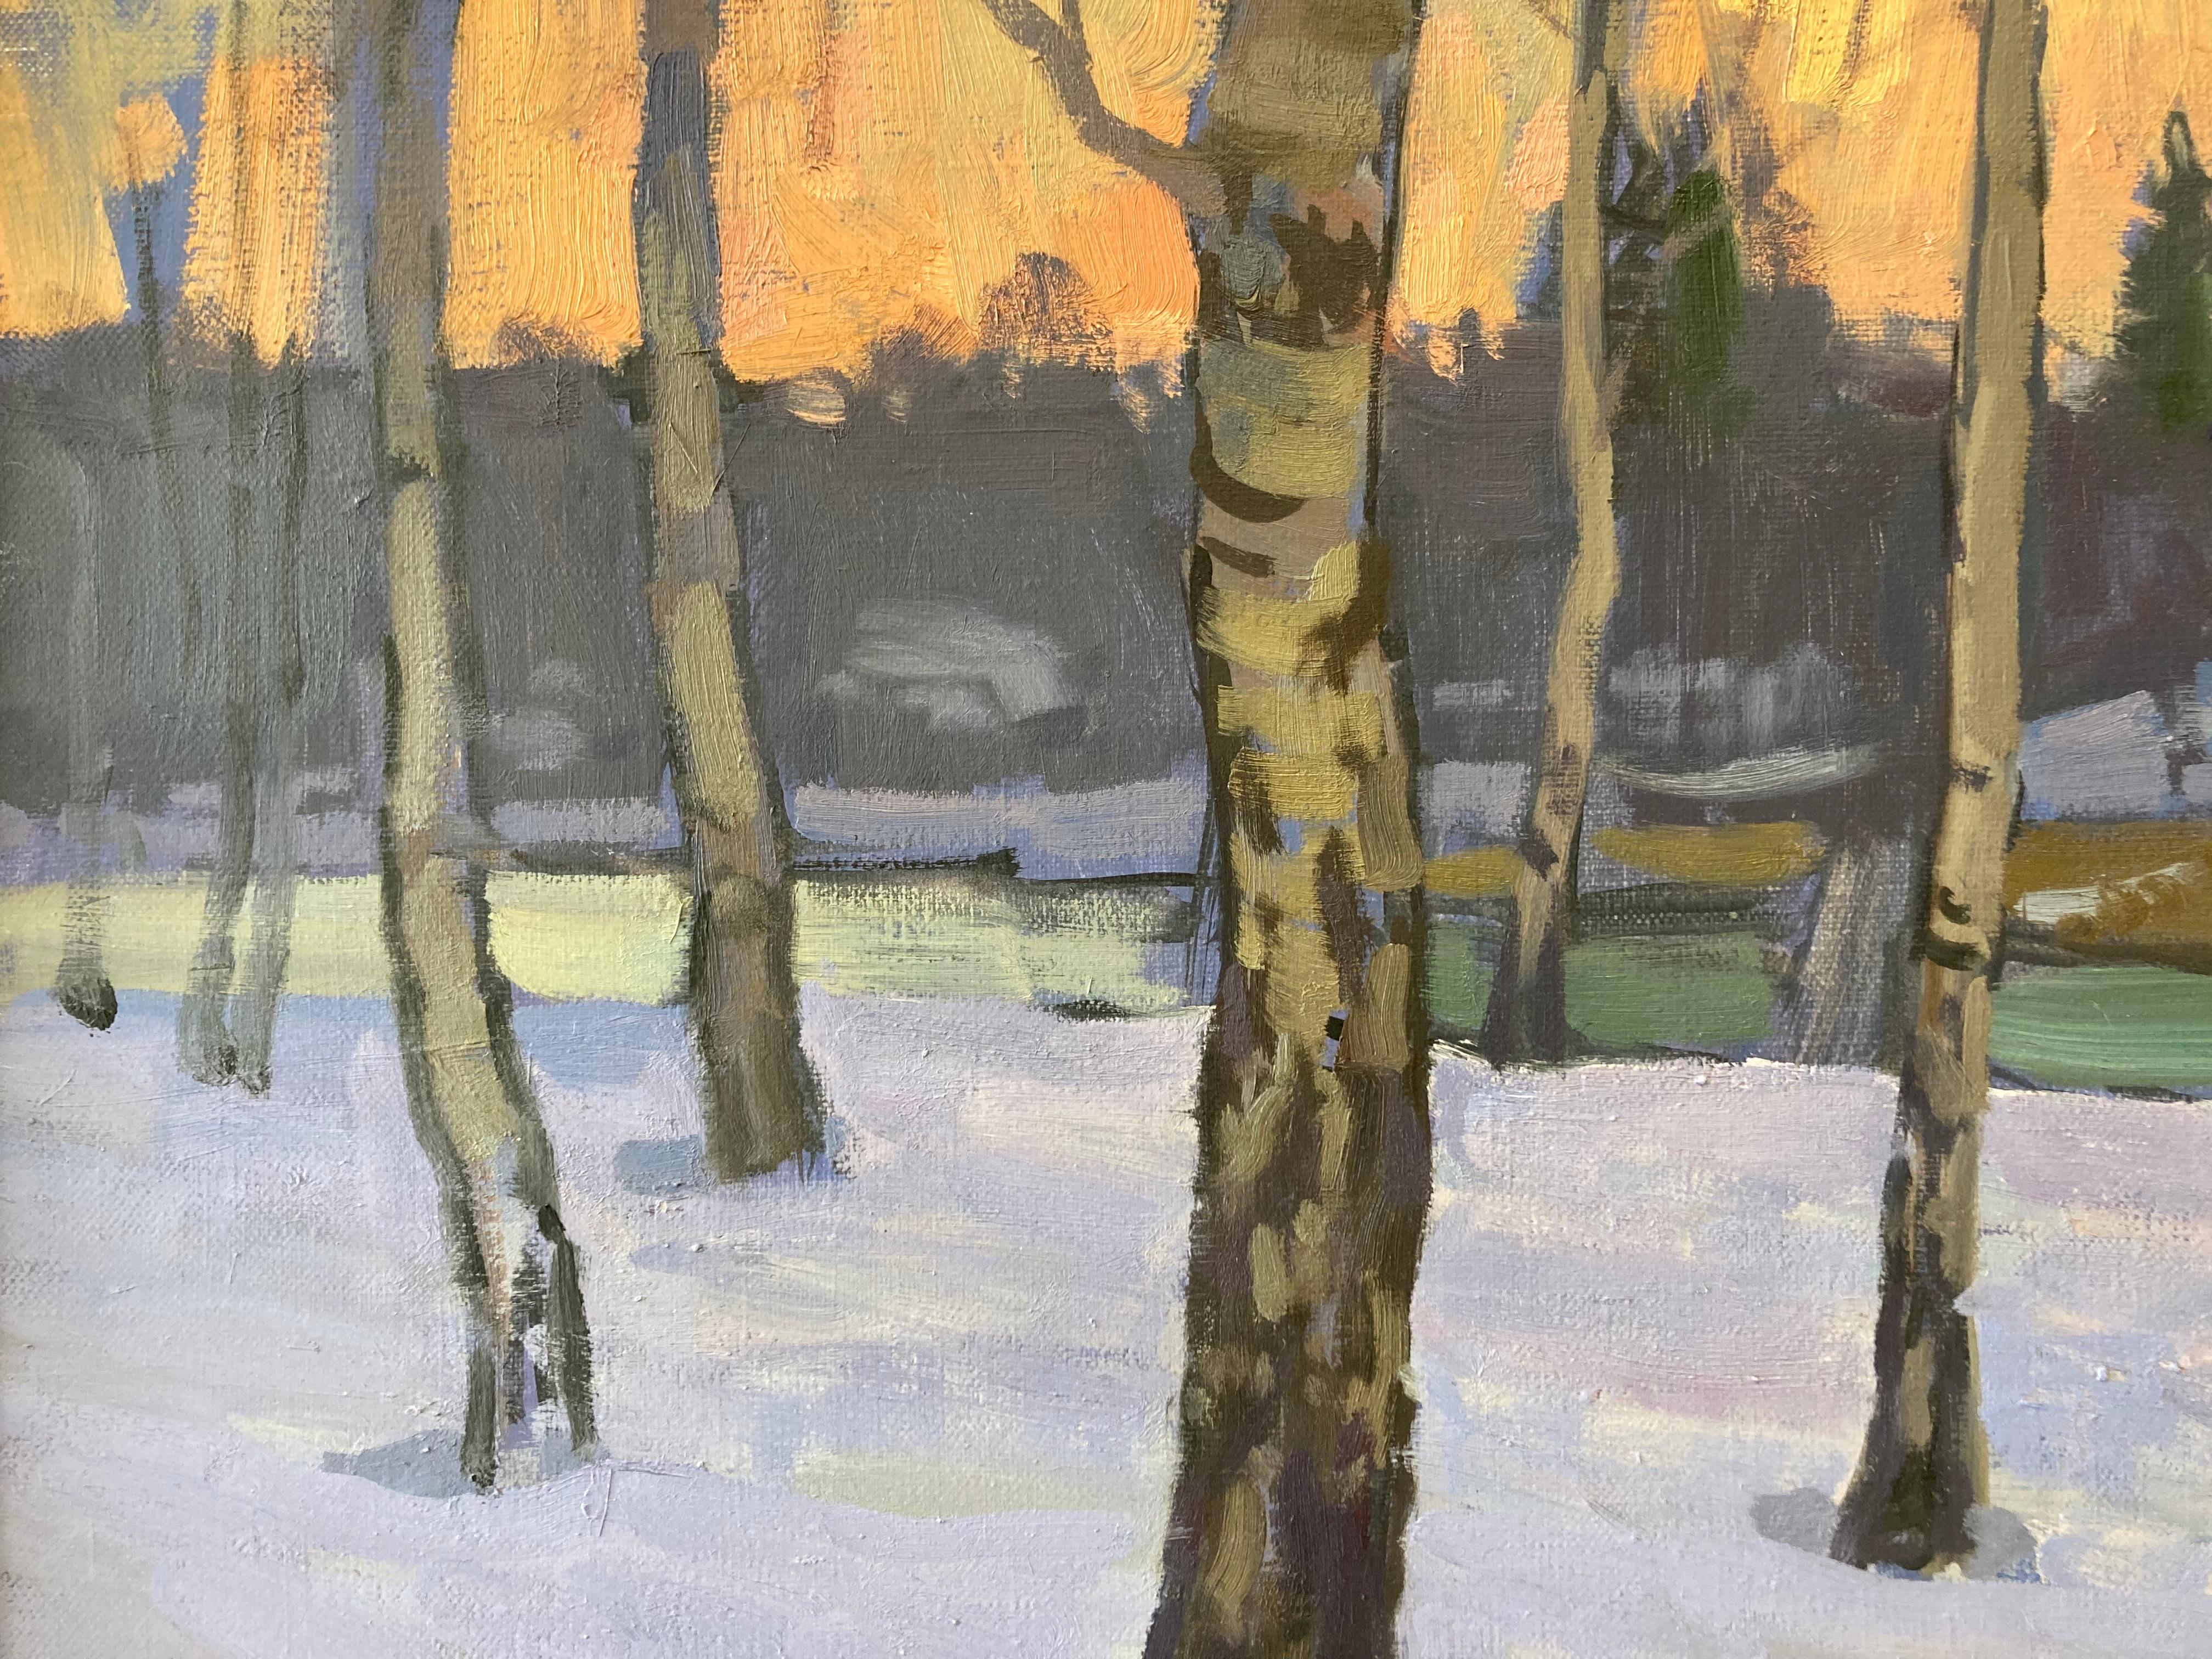 An impressionist painting of trees silhouetted against a bright sunset. The contrast between the subtle colors in the trees and the warm glowing colors of the sky. The trees in the distance fade into a warm dark purple and the lavender field of snow